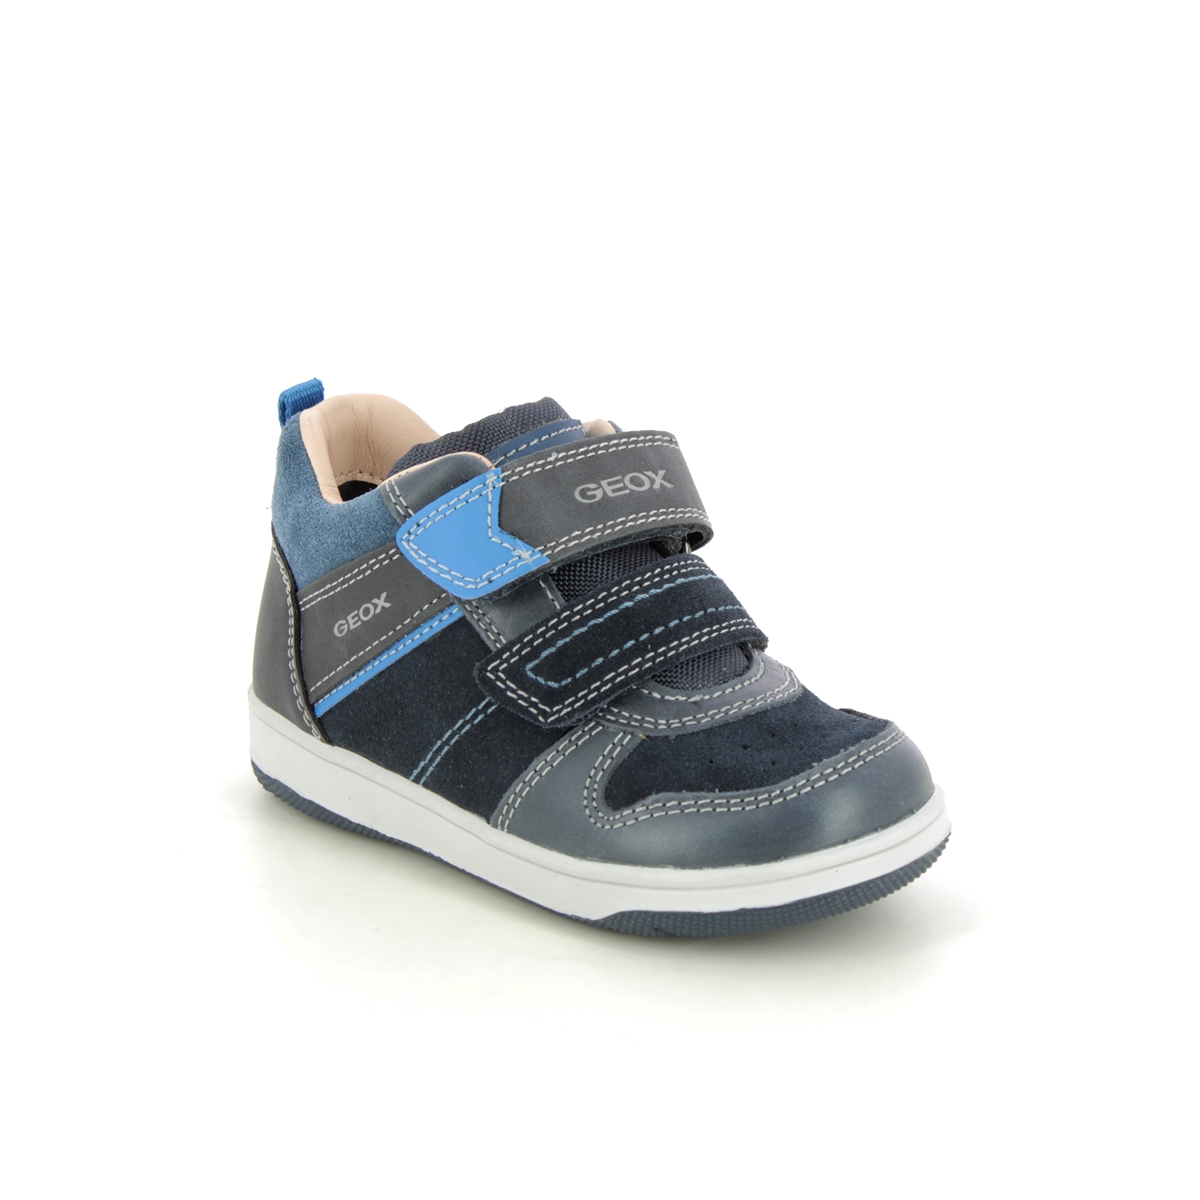 Geox - New Flick B 2V (Navy Leather) B161La-C4231 In Size 23 In Plain Navy Leather For kids